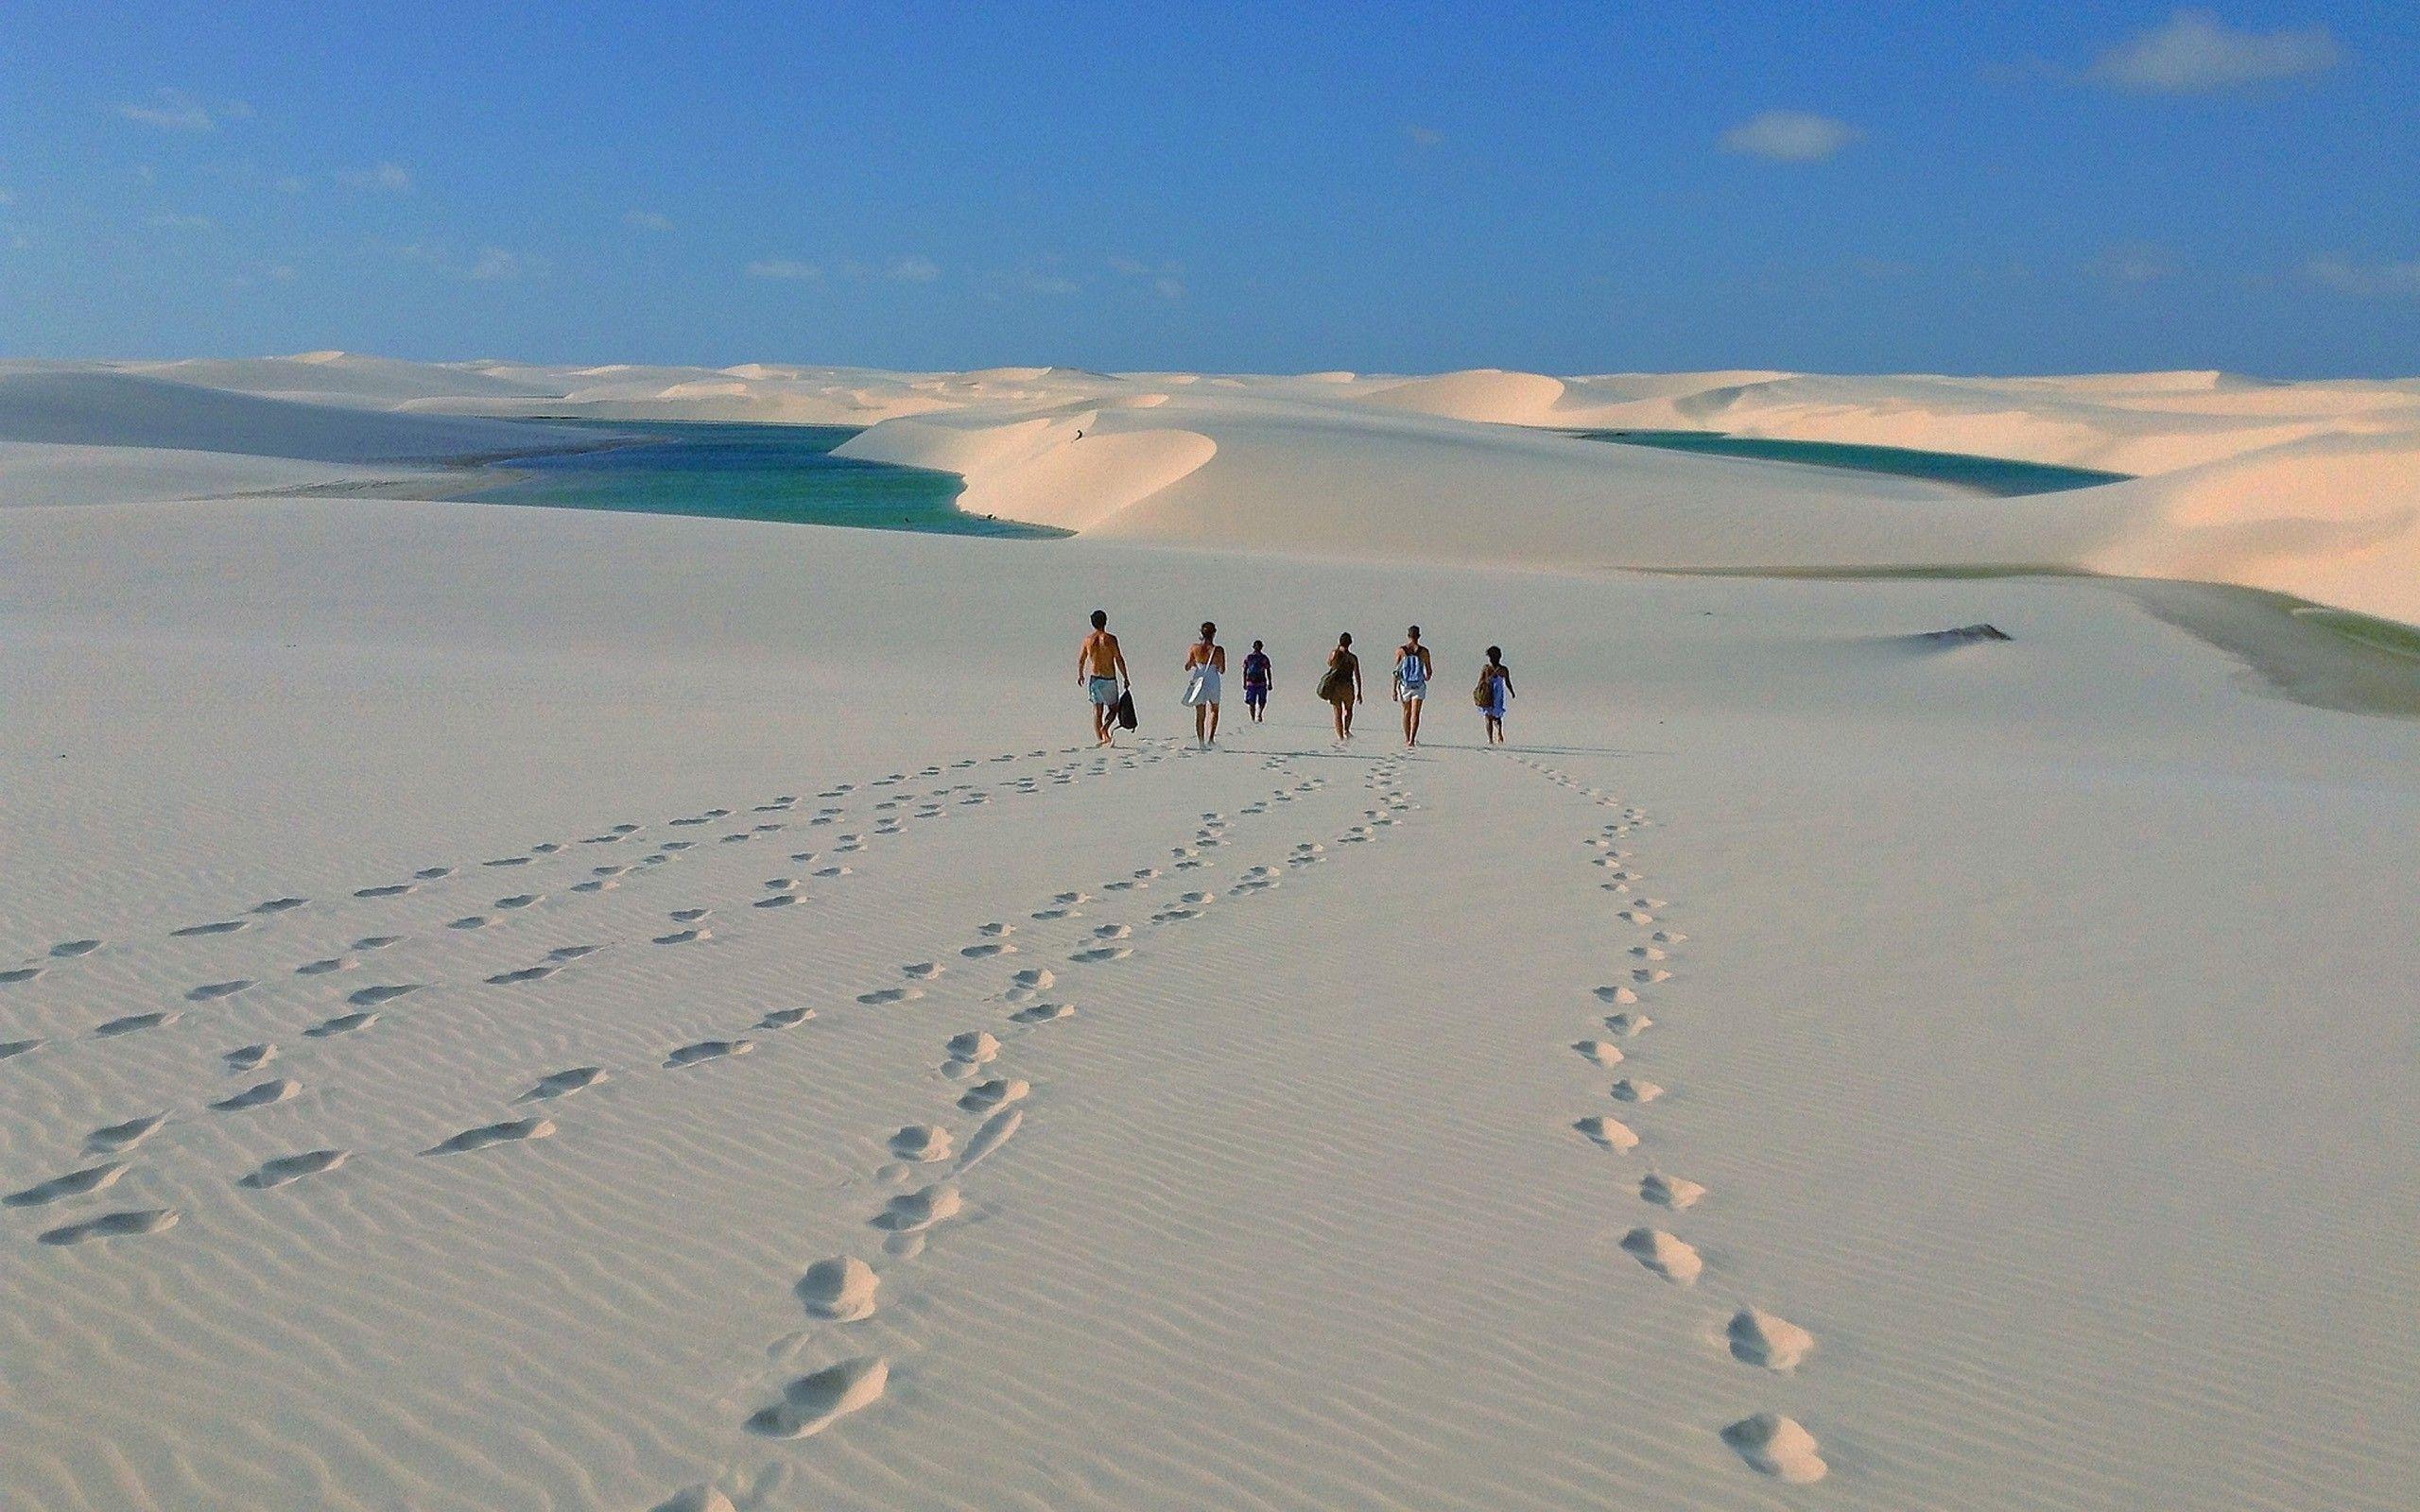 Footprints in the sand in Brazil wallpaper and image